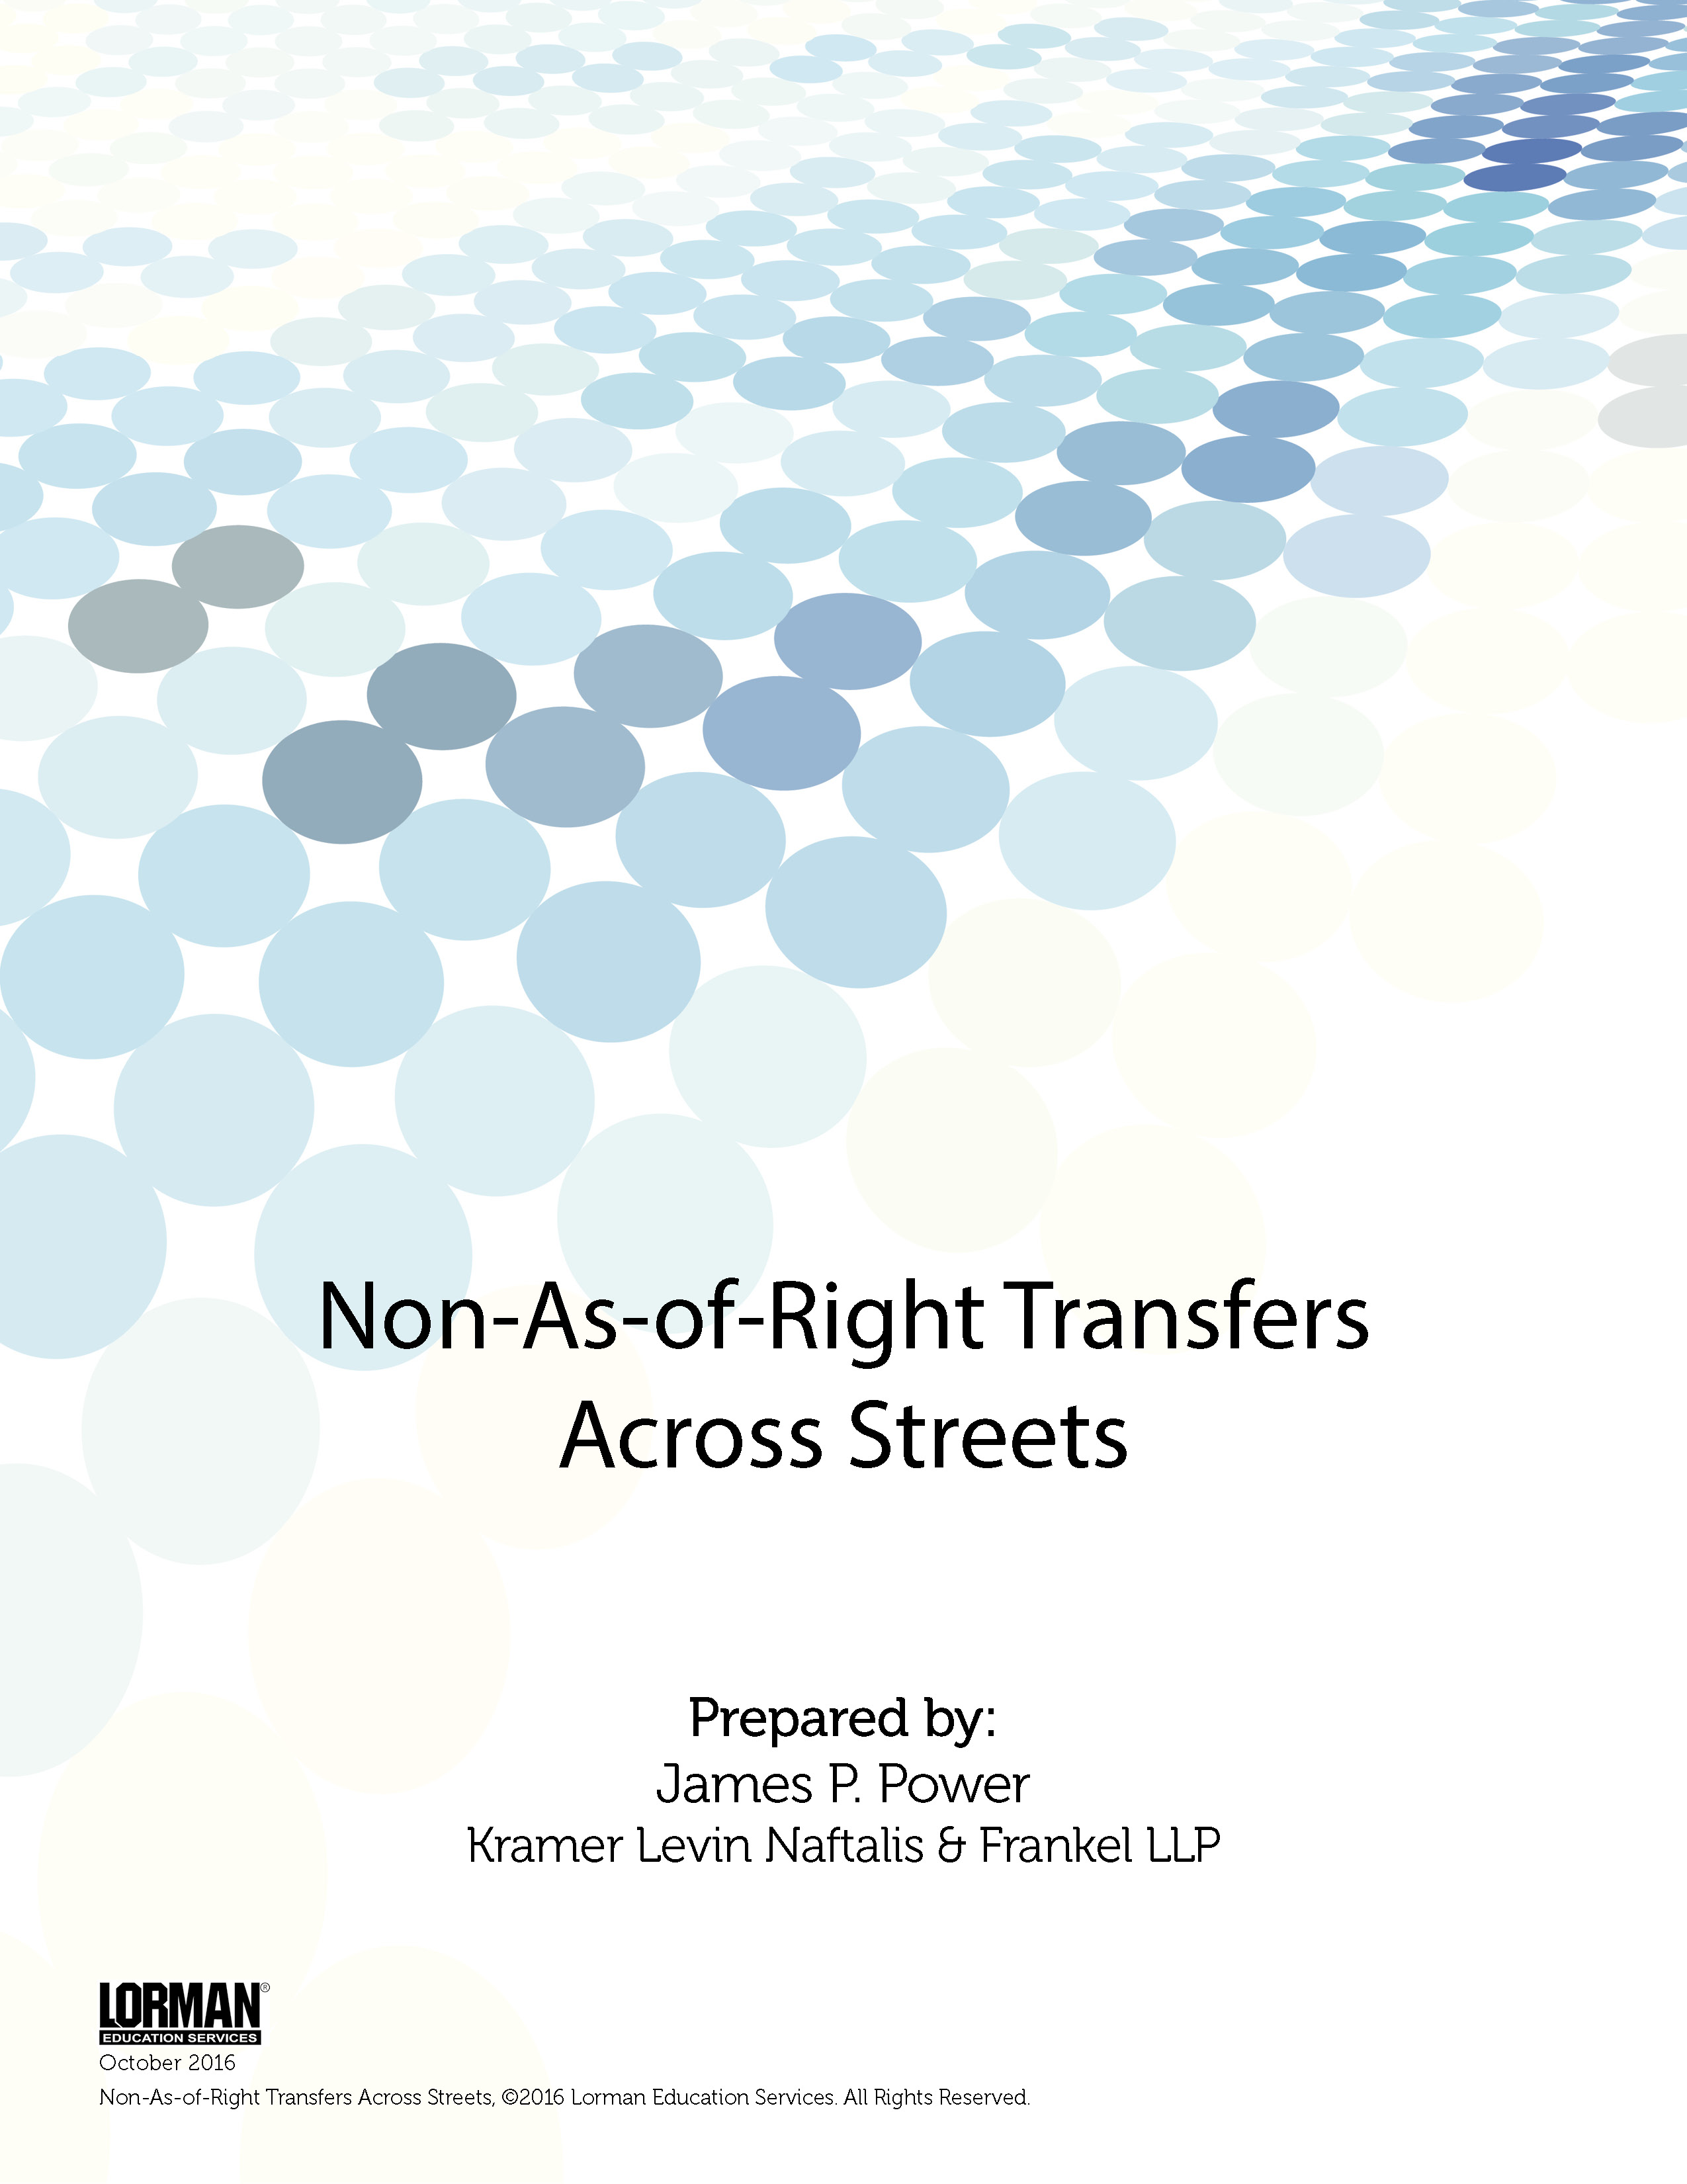 Non-As-of-Right Transfers Across Streets